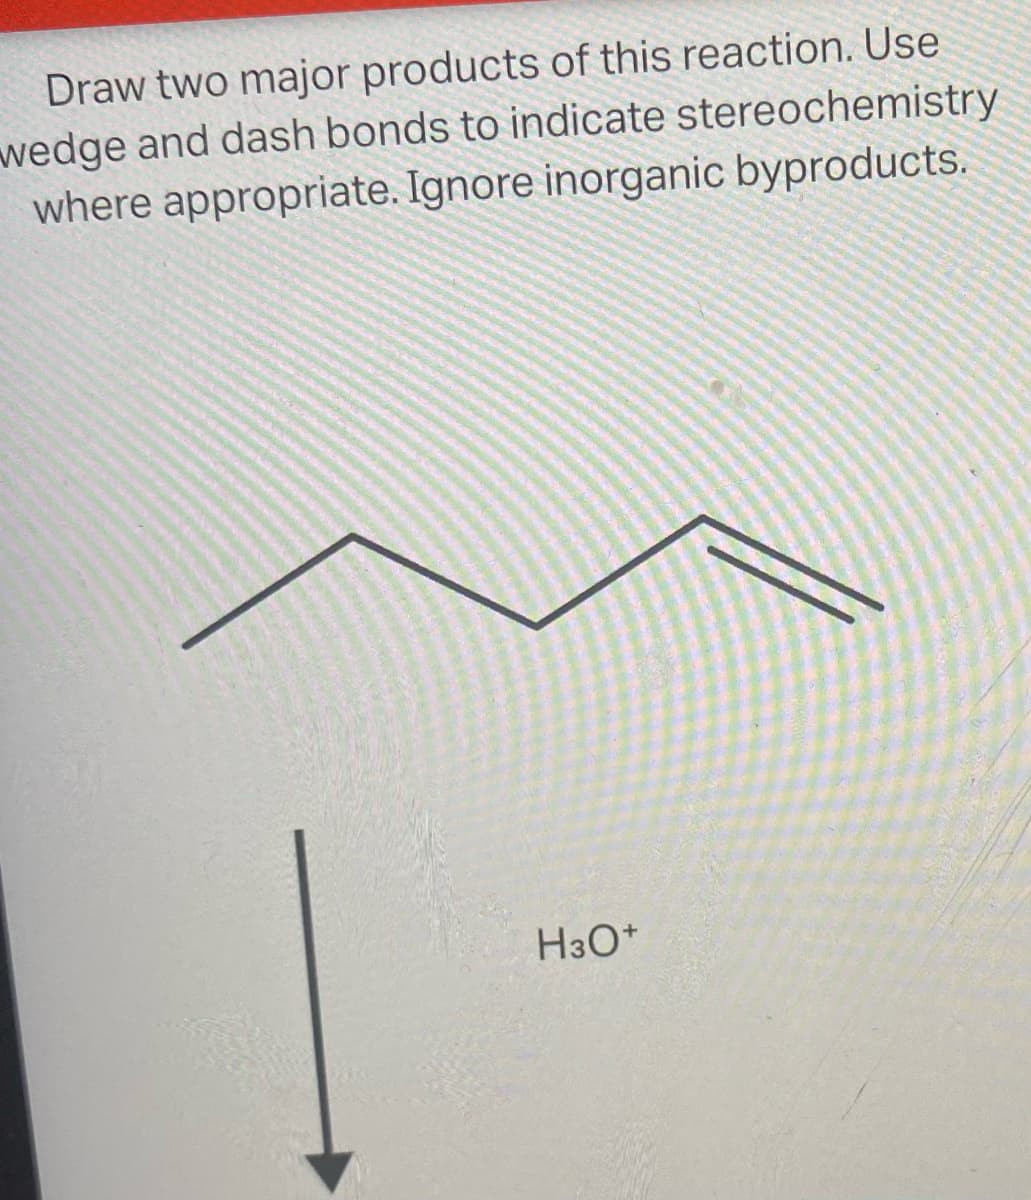 Draw two major products of this reaction. Use
wedge and dash bonds to indicate stereochemistry
where appropriate. Ignore inorganic byproducts.
H3O+